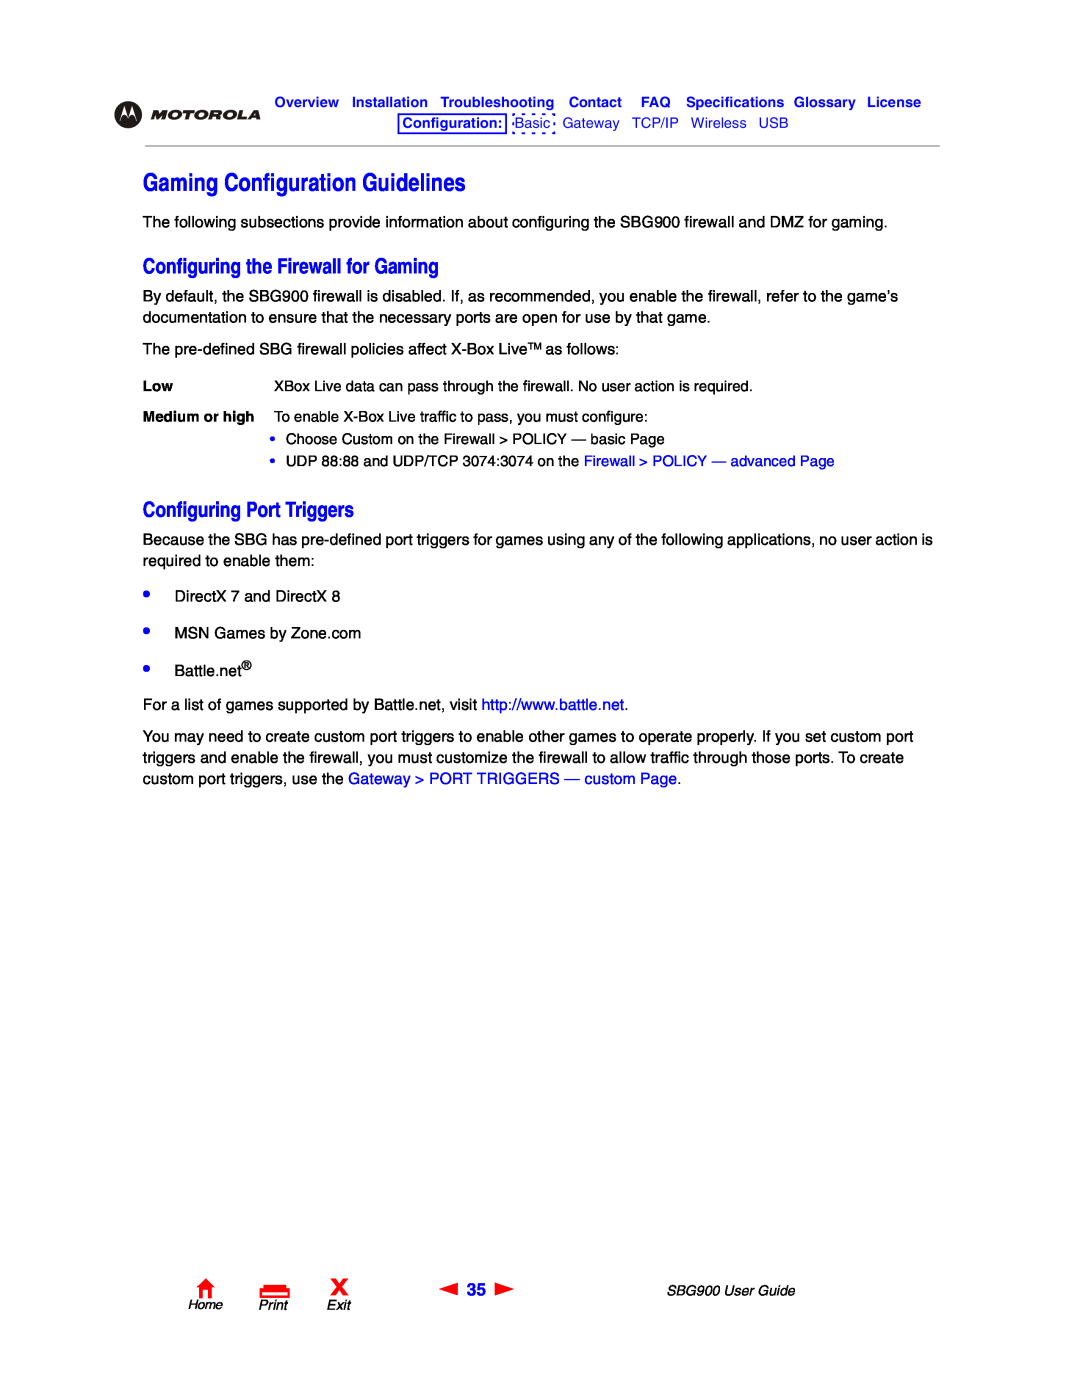 Motorola SBG900 manual Gaming Configuration Guidelines, Configuring the Firewall for Gaming, Configuring Port Triggers 